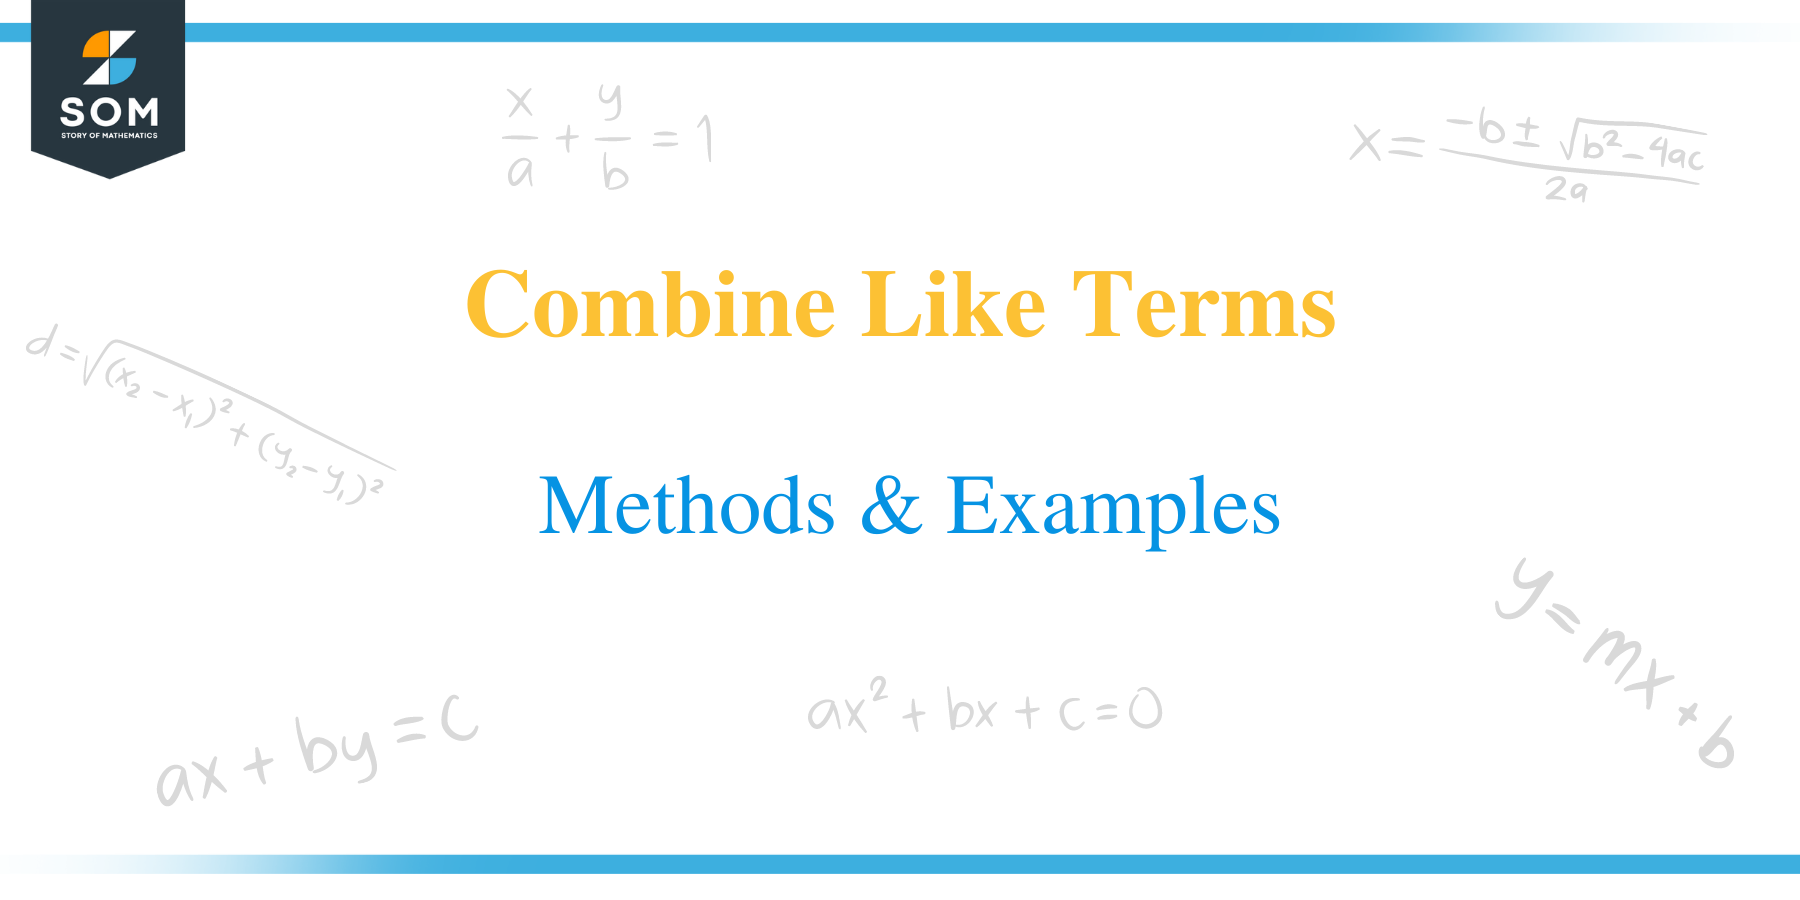 Combine Like Terms title